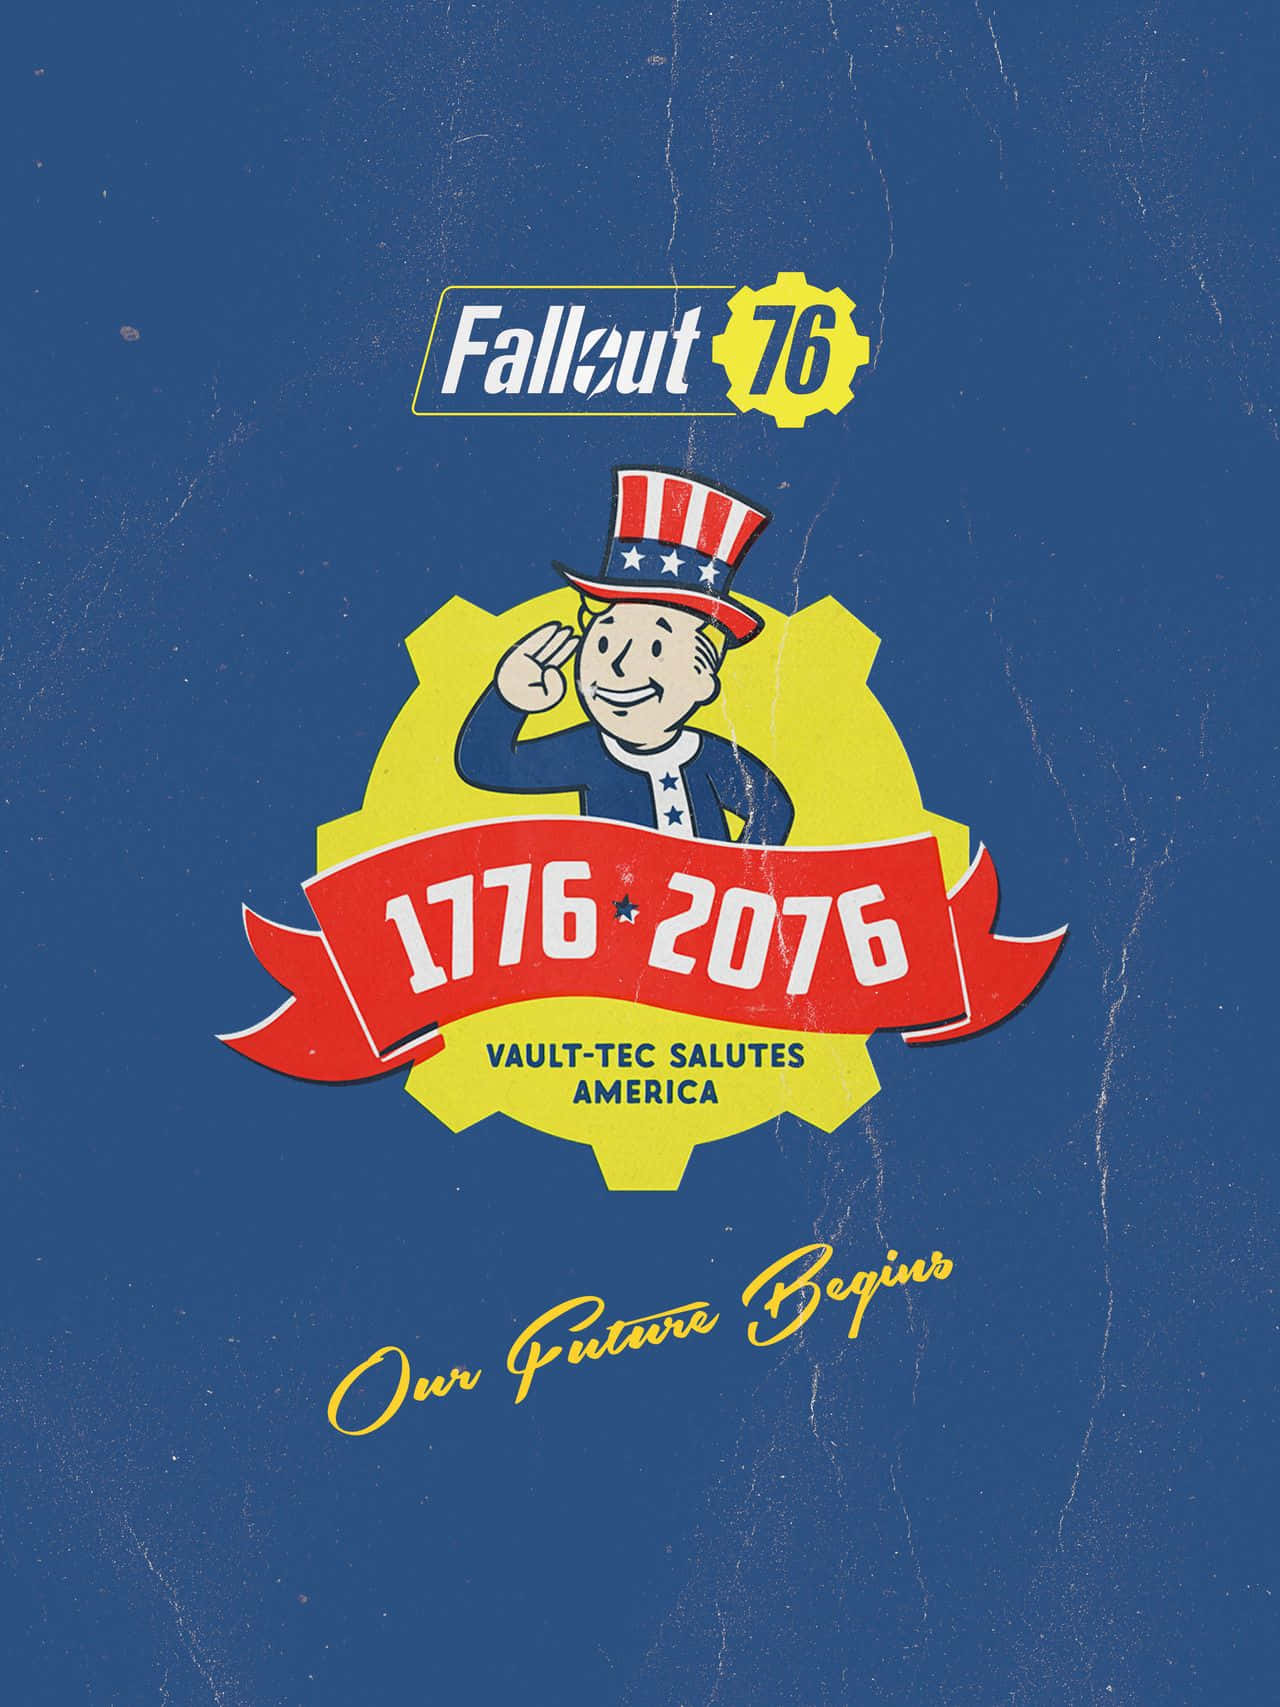 Post-apocalyptic World Of Fallout 76